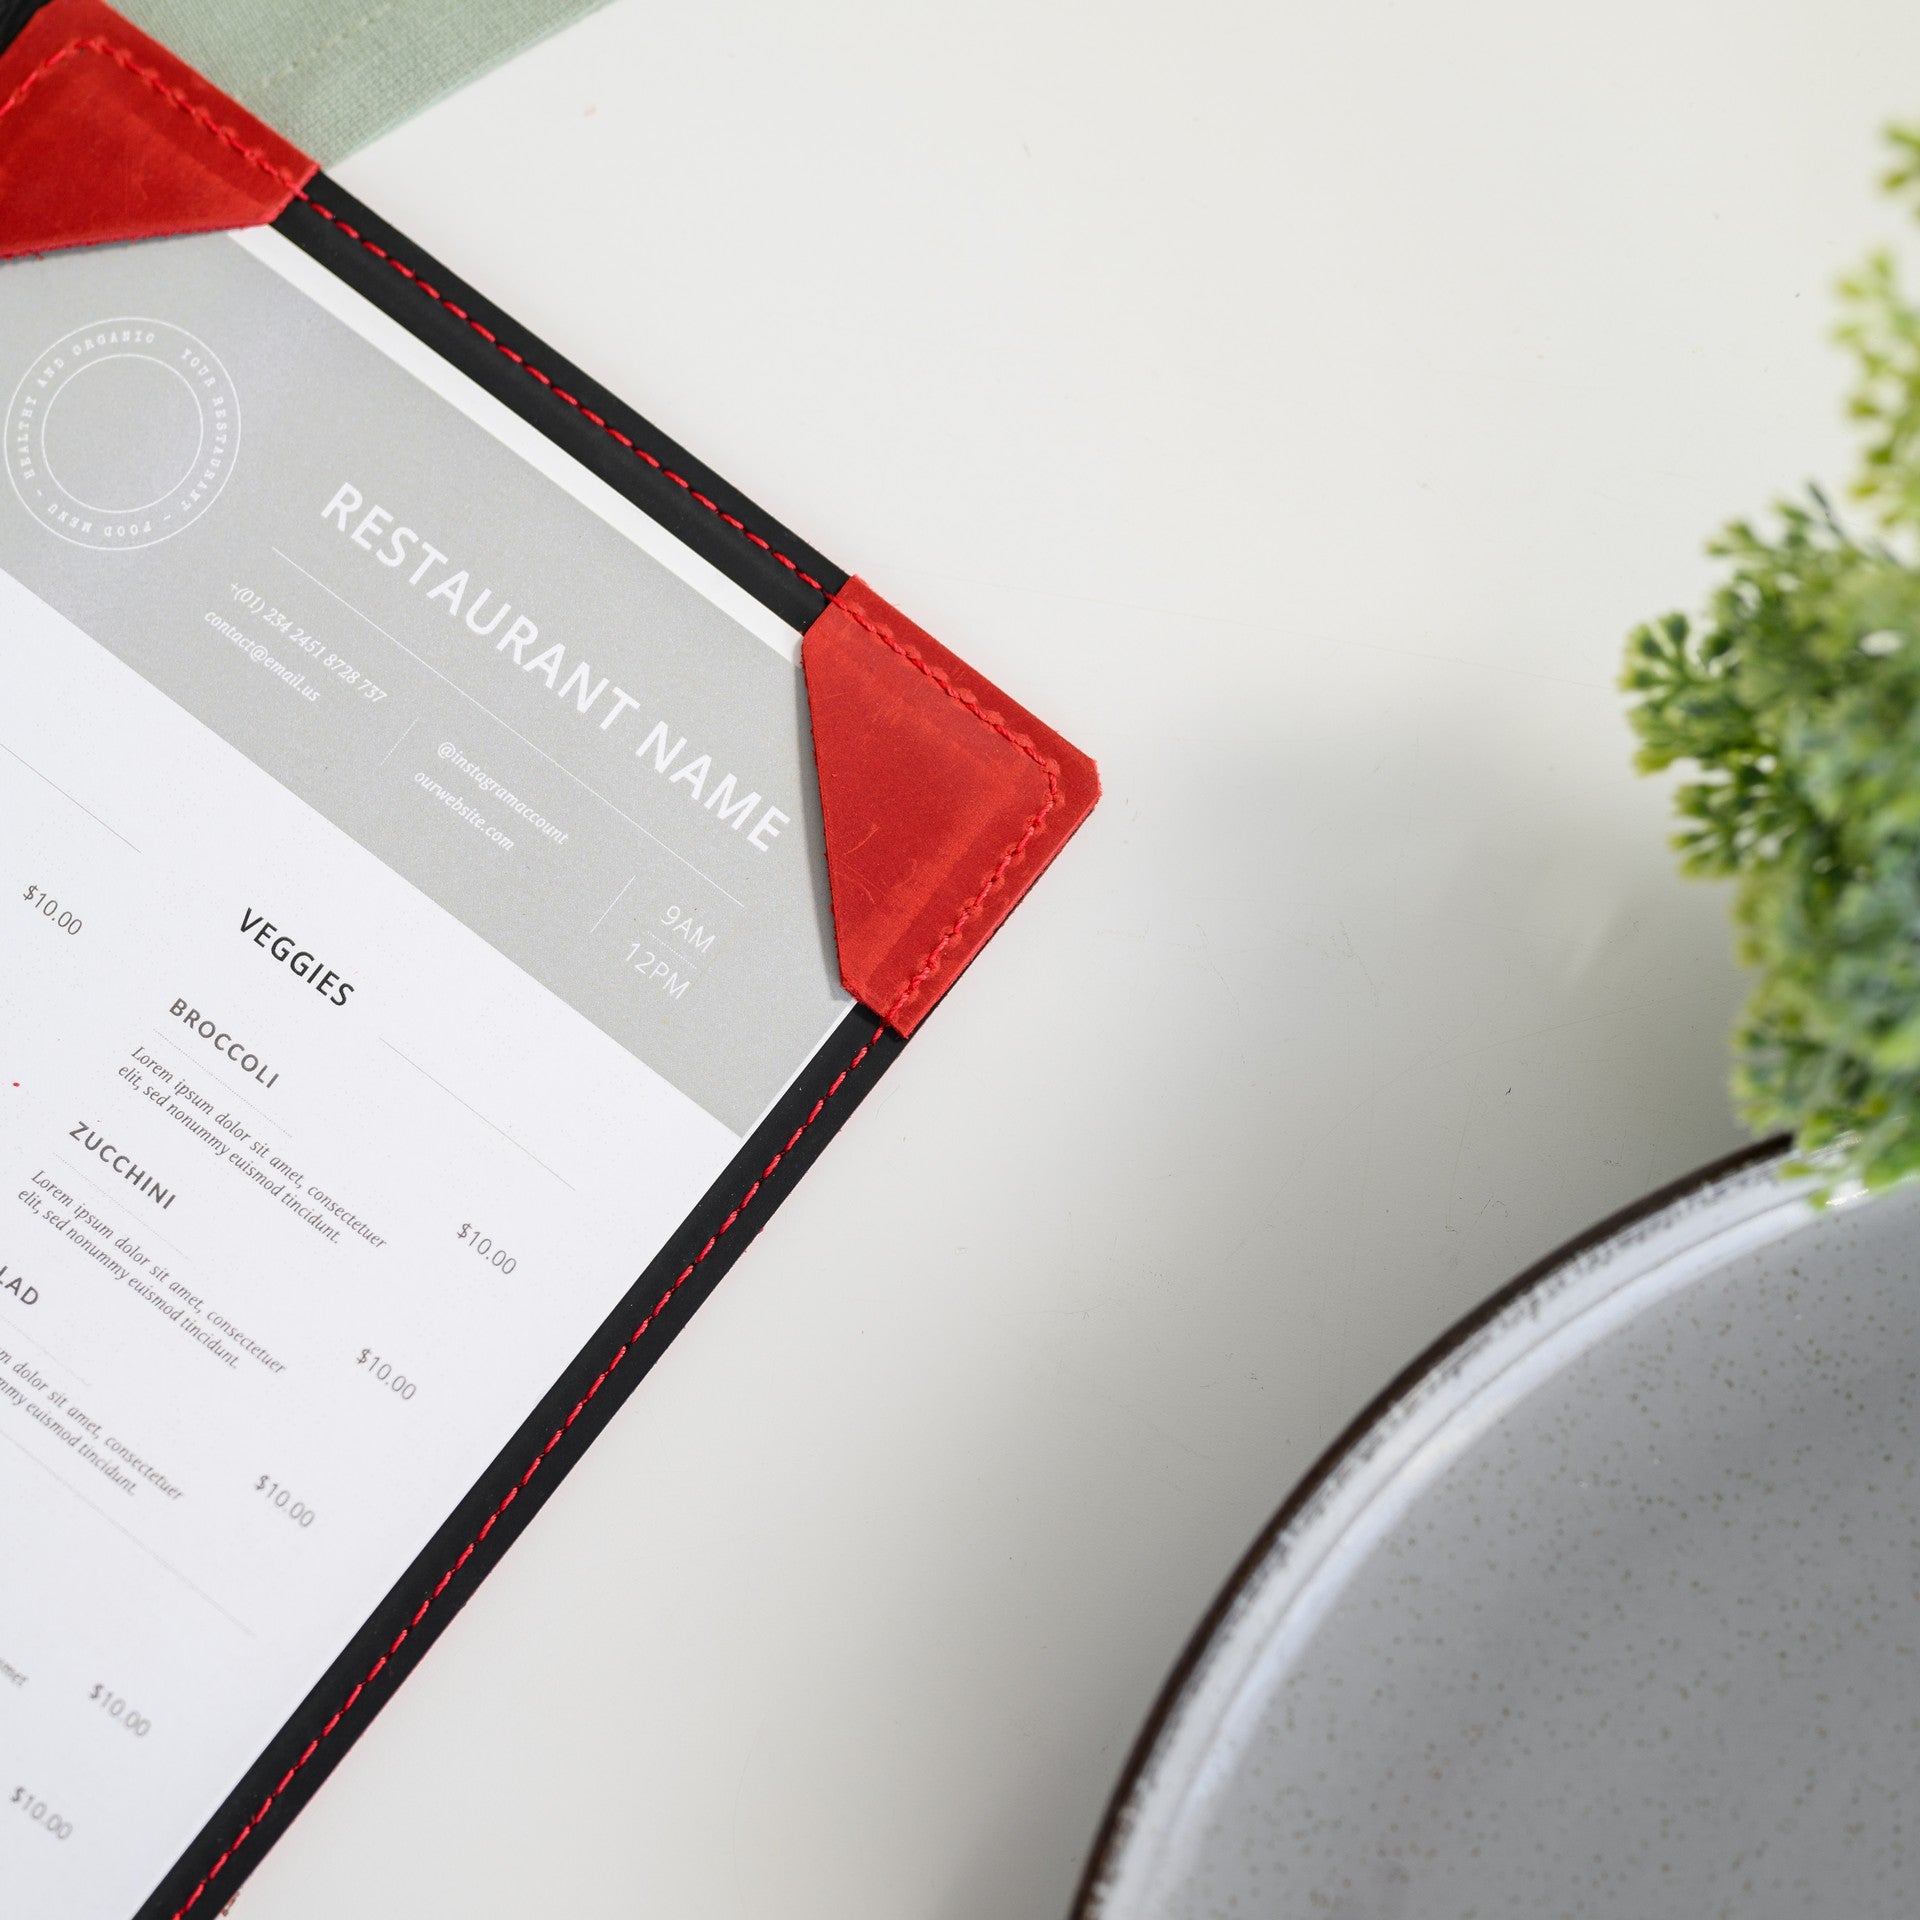 Modern Menu Cover with Corner Mountings, combining functionality with contemporary design for a sleek presentation.